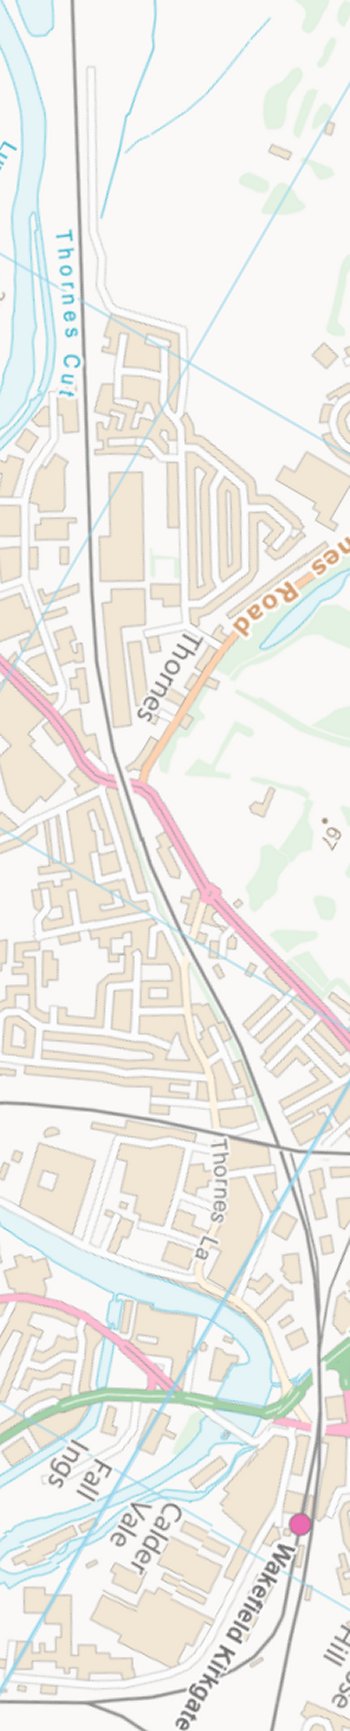 Section from Ordnance Survey OpenSource mapping 2013 showing L&YR railway line around and though Wakefield Kirkgate railway station.